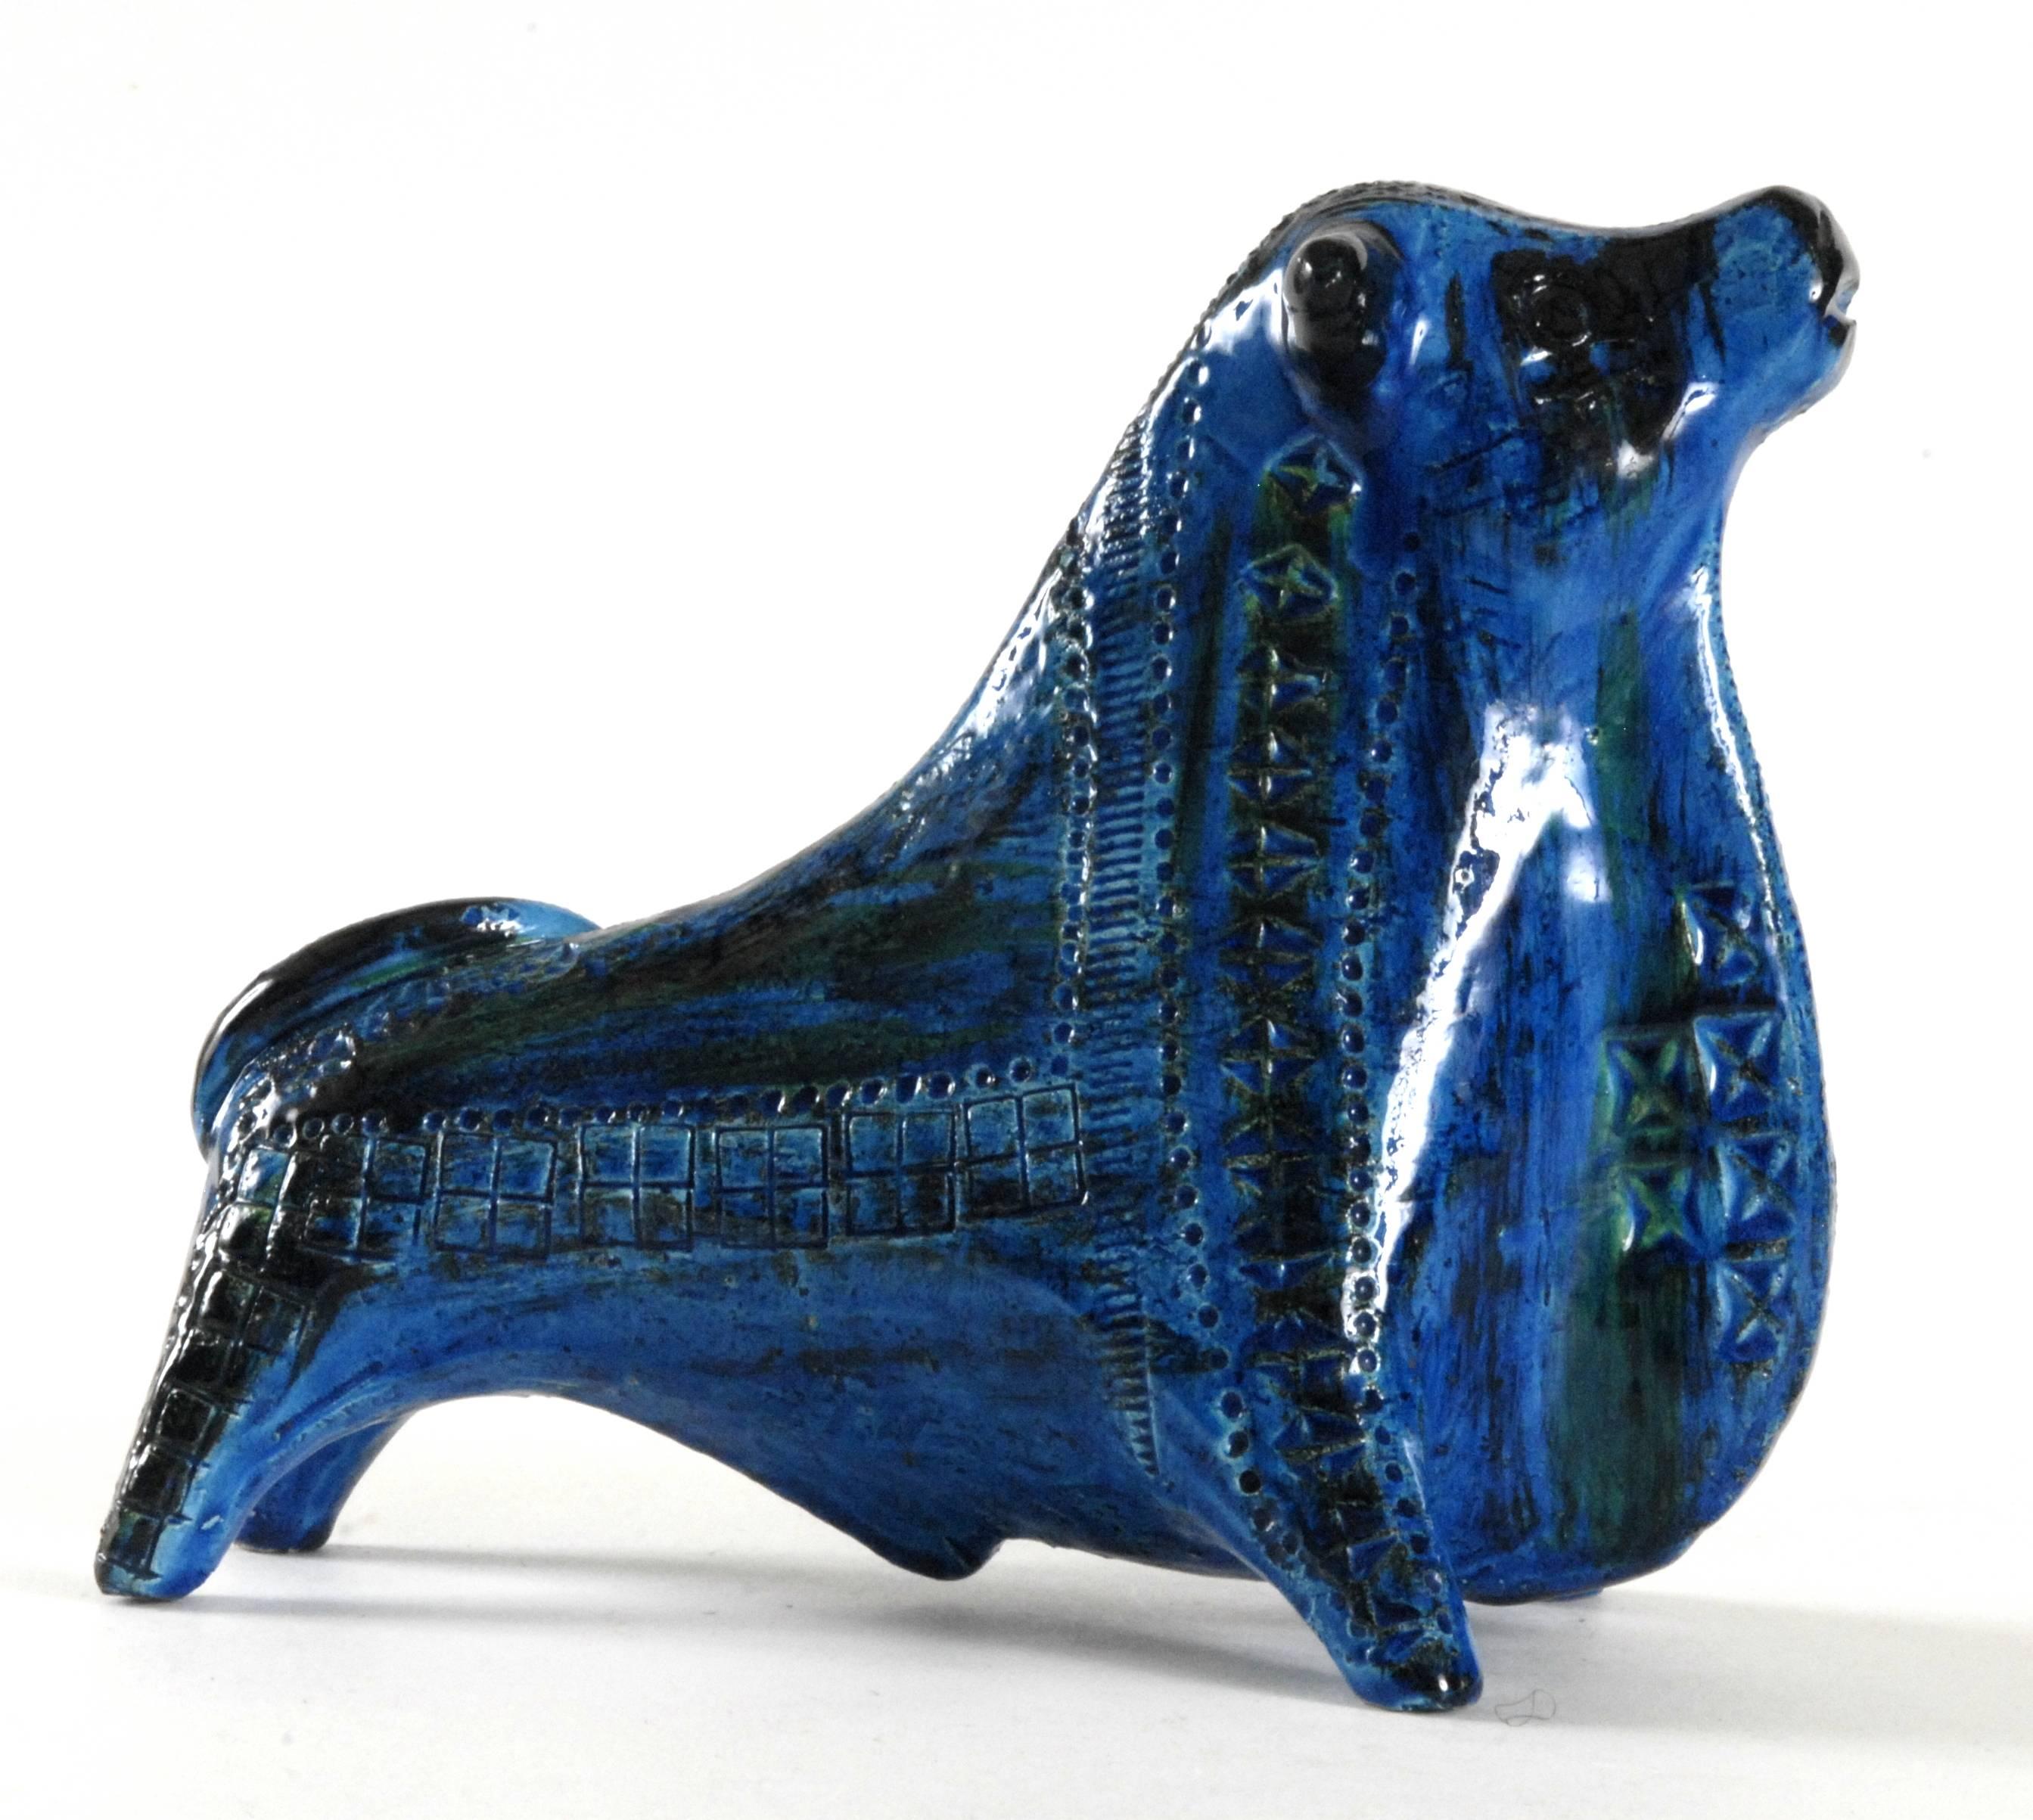 An early Aldo Londi designed stylized rearing bull in blue with the 'Rimini' color. Impressive strong design that was very popular in this period.